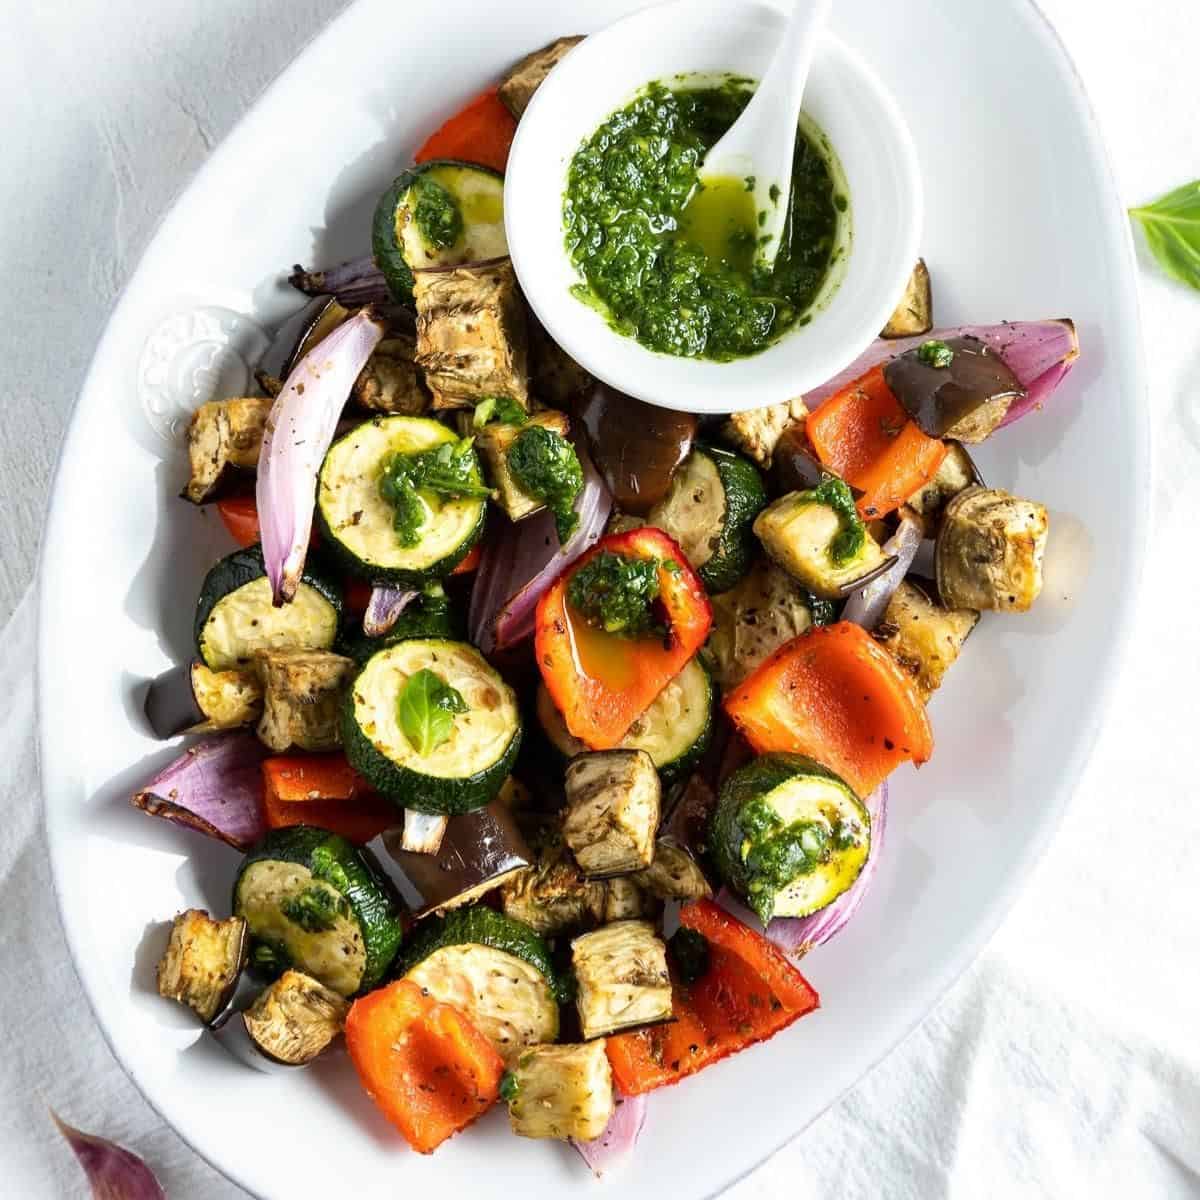 White oval serving dish of colourful roasted vegetables with a small dish of green herb sauce on the side.